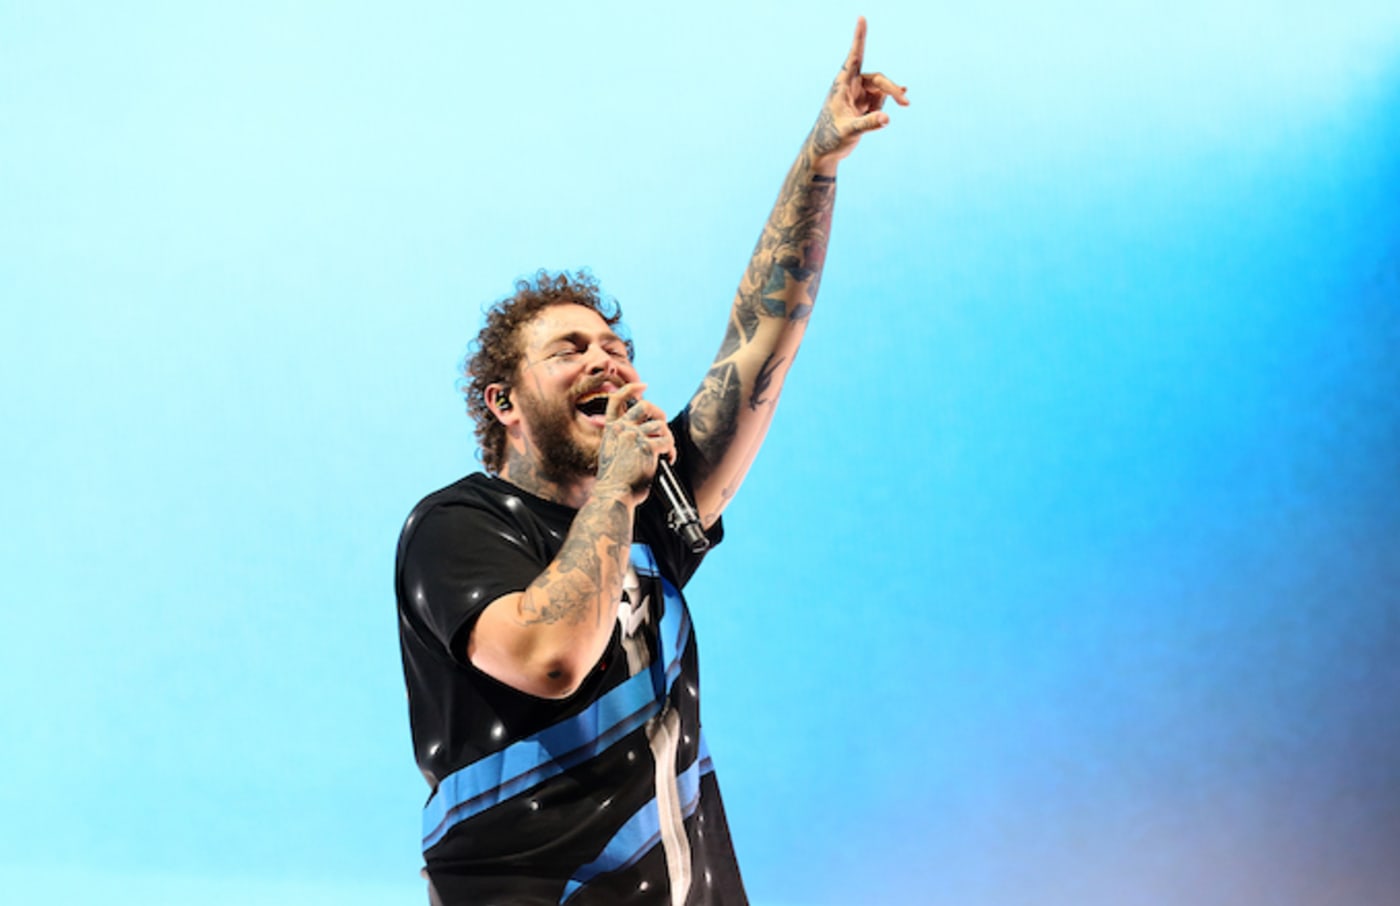 Post Malone performs live on the Main Stage of Reading Festival 2019.